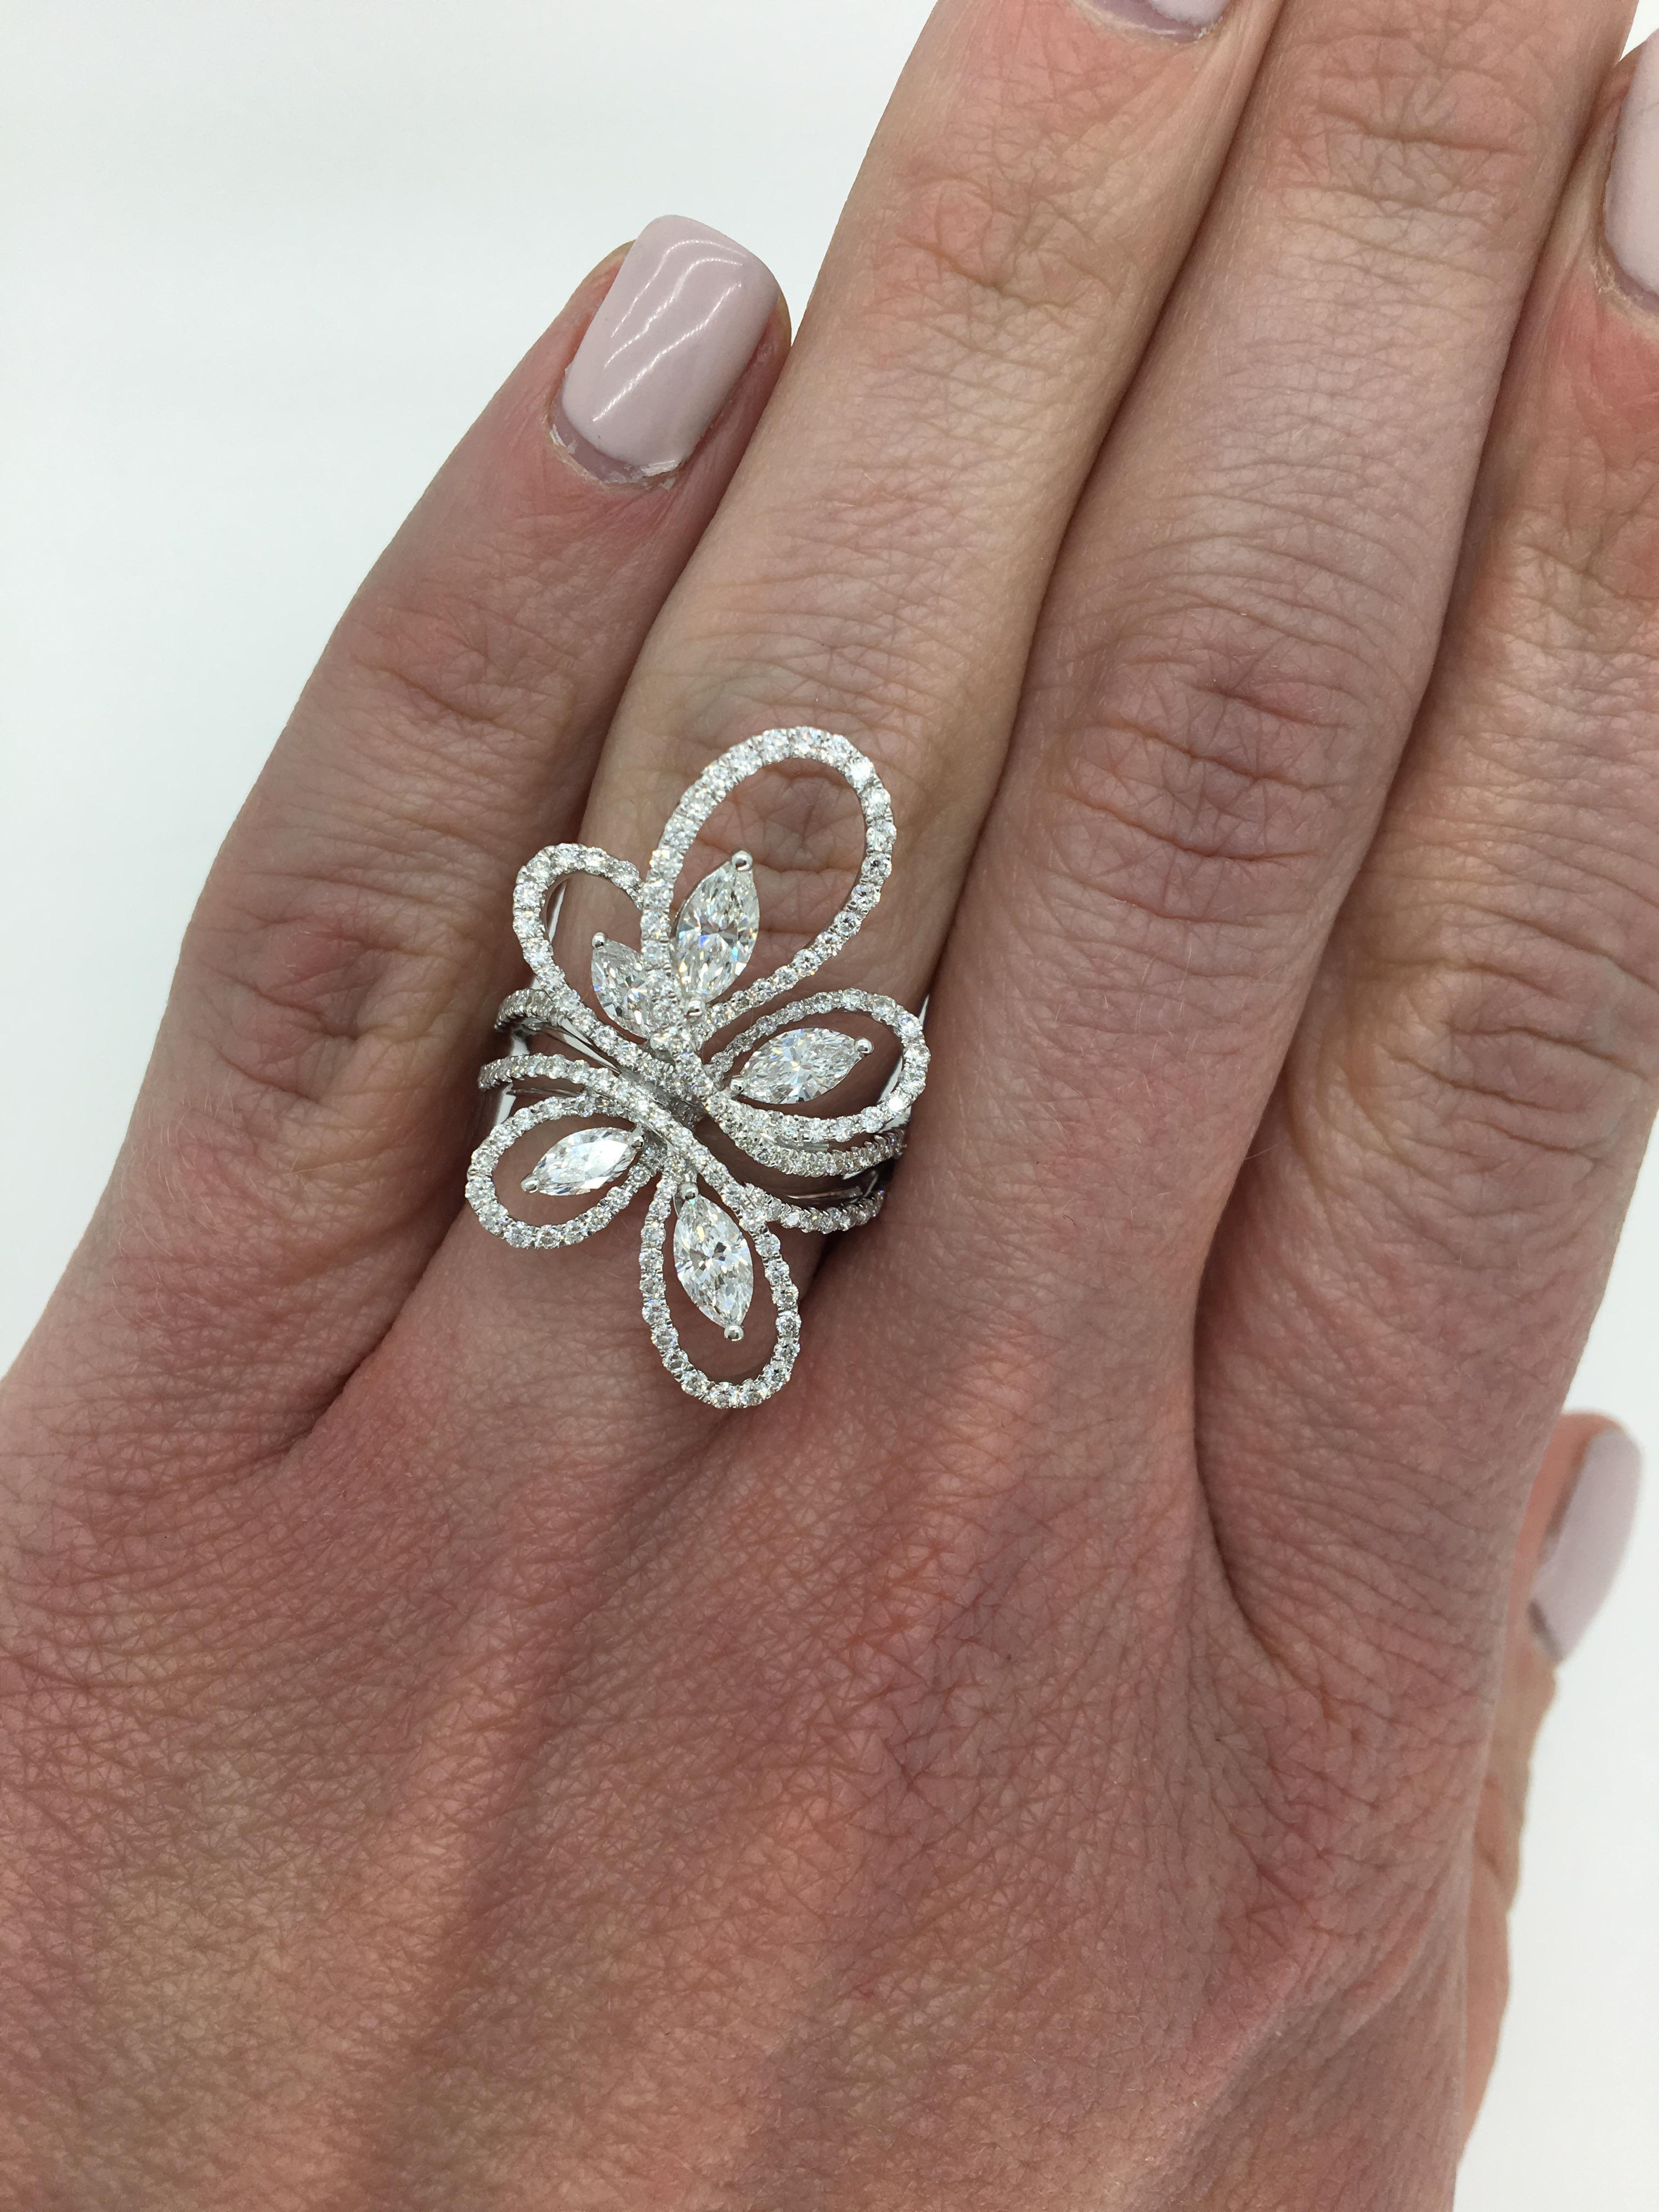 Pave set diamond ring with a floral swirl of Round Brilliant Cut and Marquise Cut diamonds crafted in 18k white gold.

Diamond Cut: Marquise Cut and Round Brilliant Cut
Average Diamond Color: G-H
Average Diamond Clarity:  VS-SI
Diamond Carat Weight: